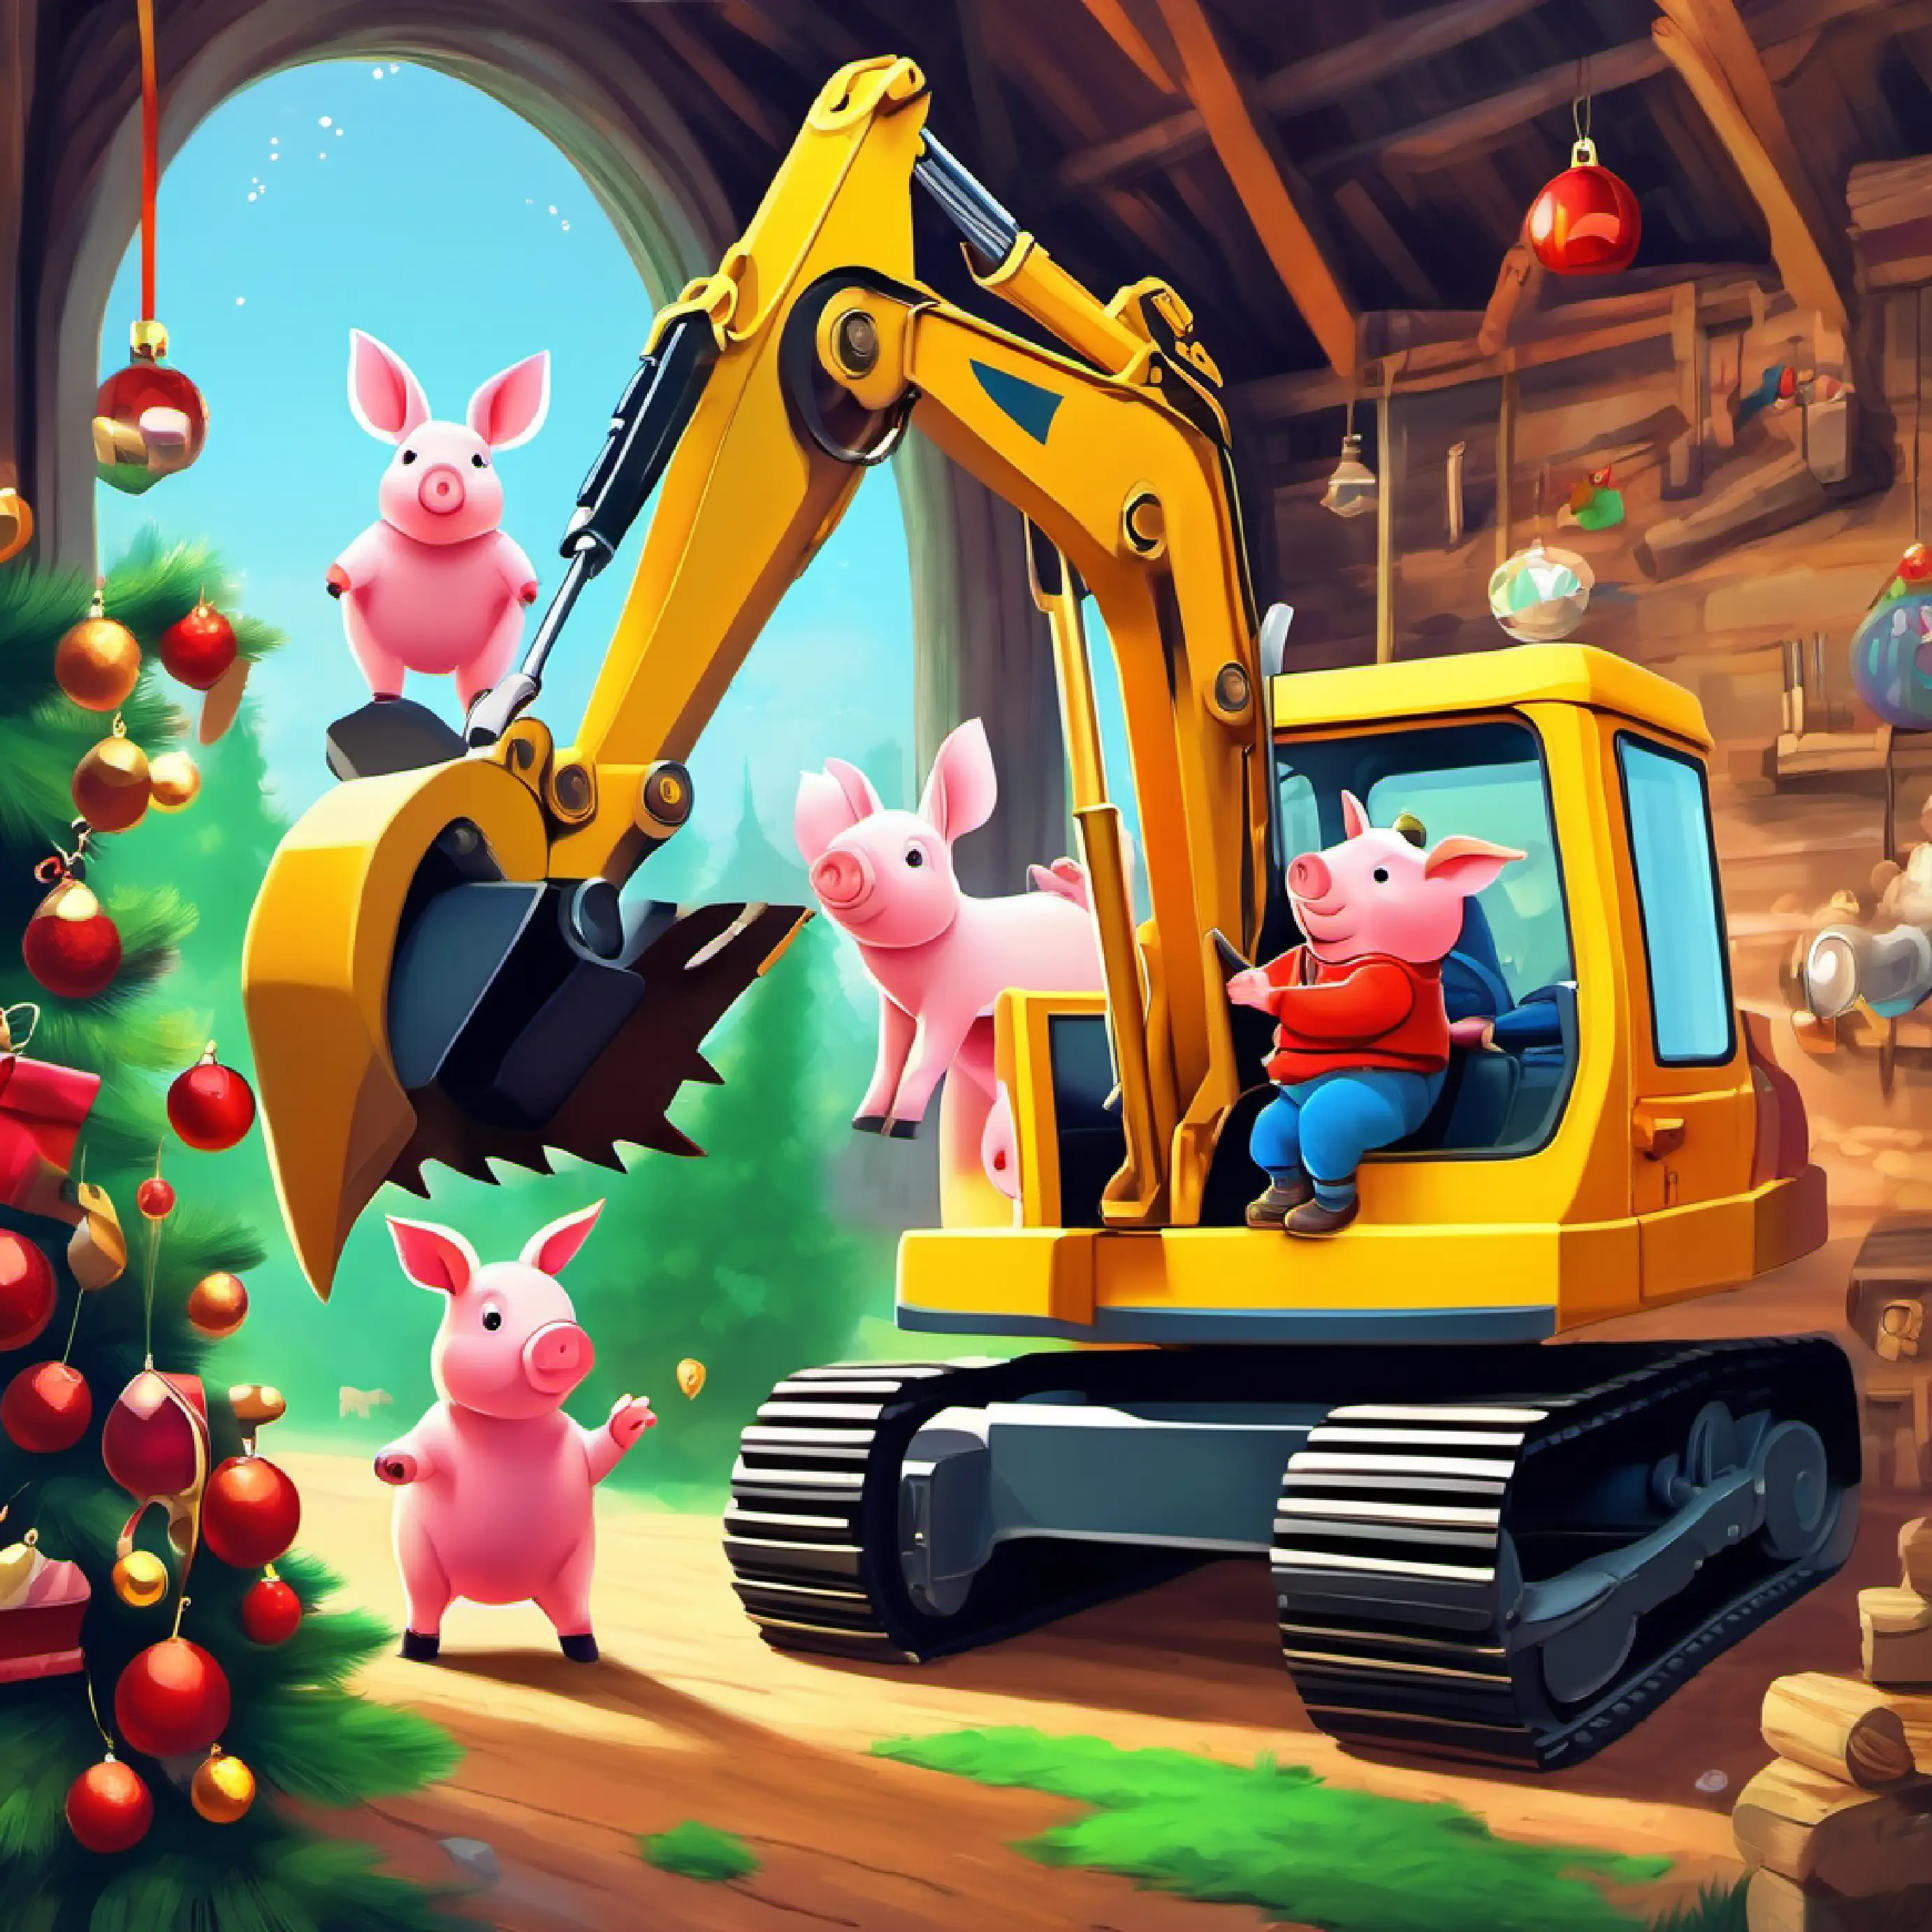 Excavator, Piglet, and Mechanic are all playing together.